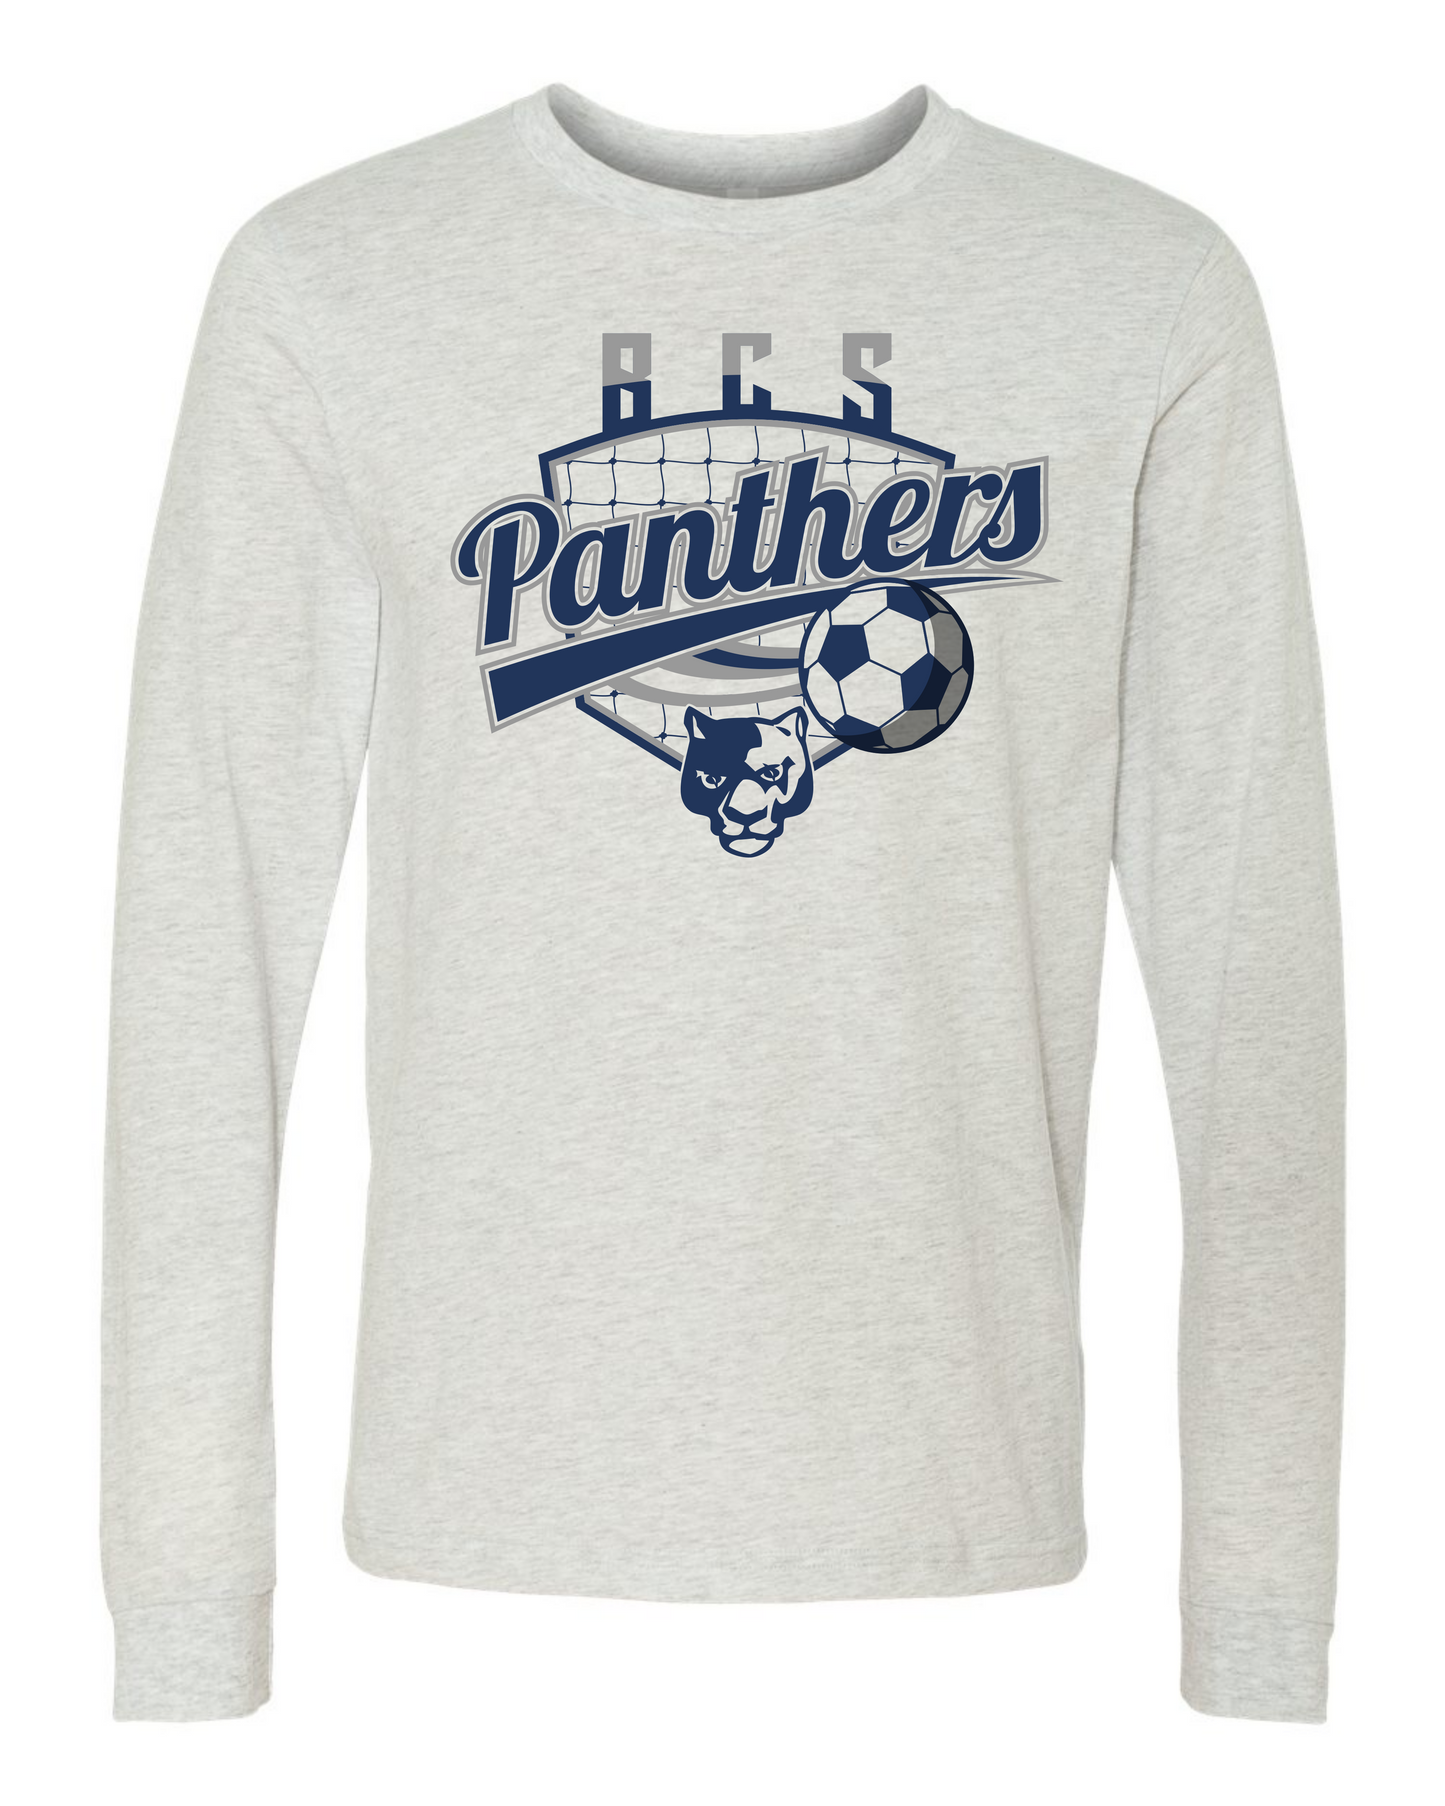 BCS Panthers Soccer Shield - Adult Long Sleeve